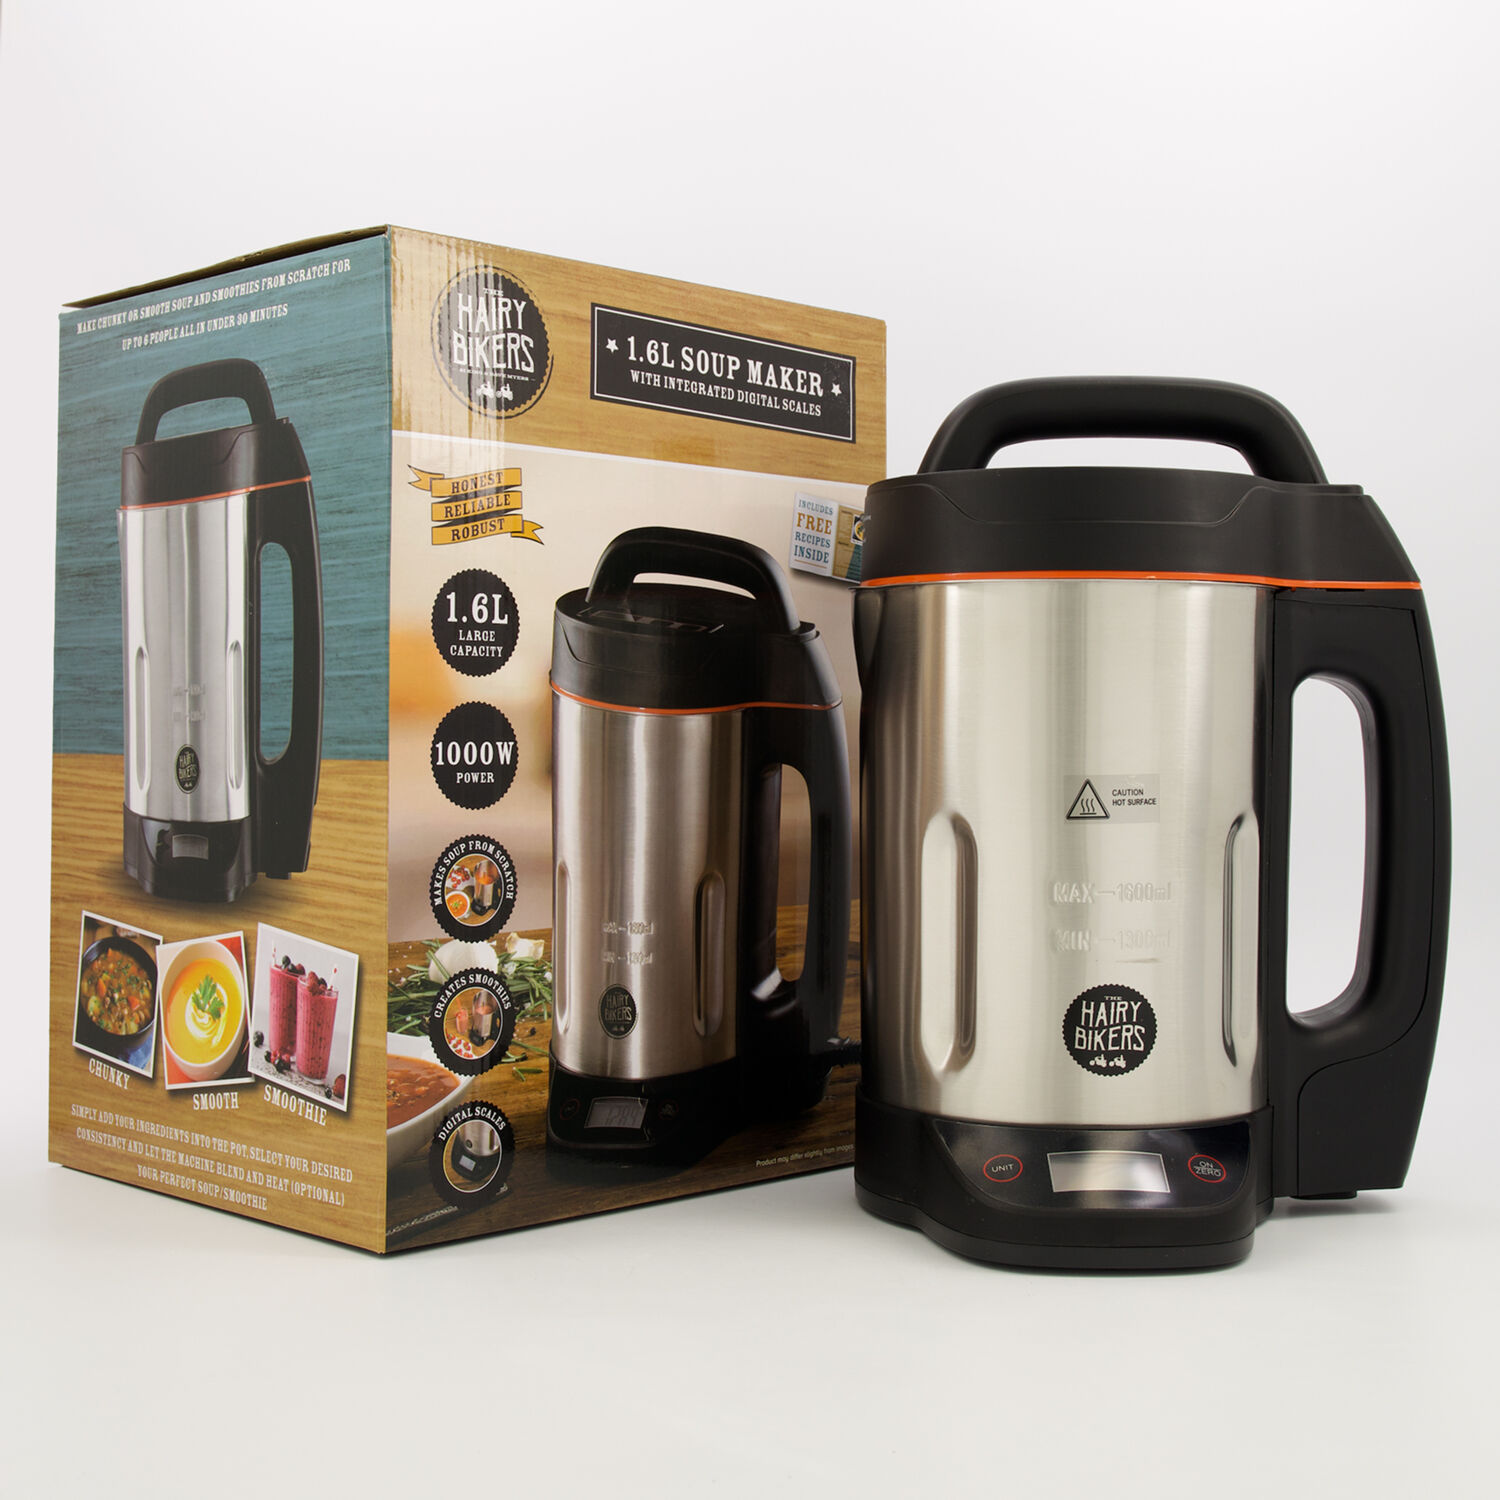 1.6L Family Sized Soup Maker with Integrated Scales, 1000W - Other